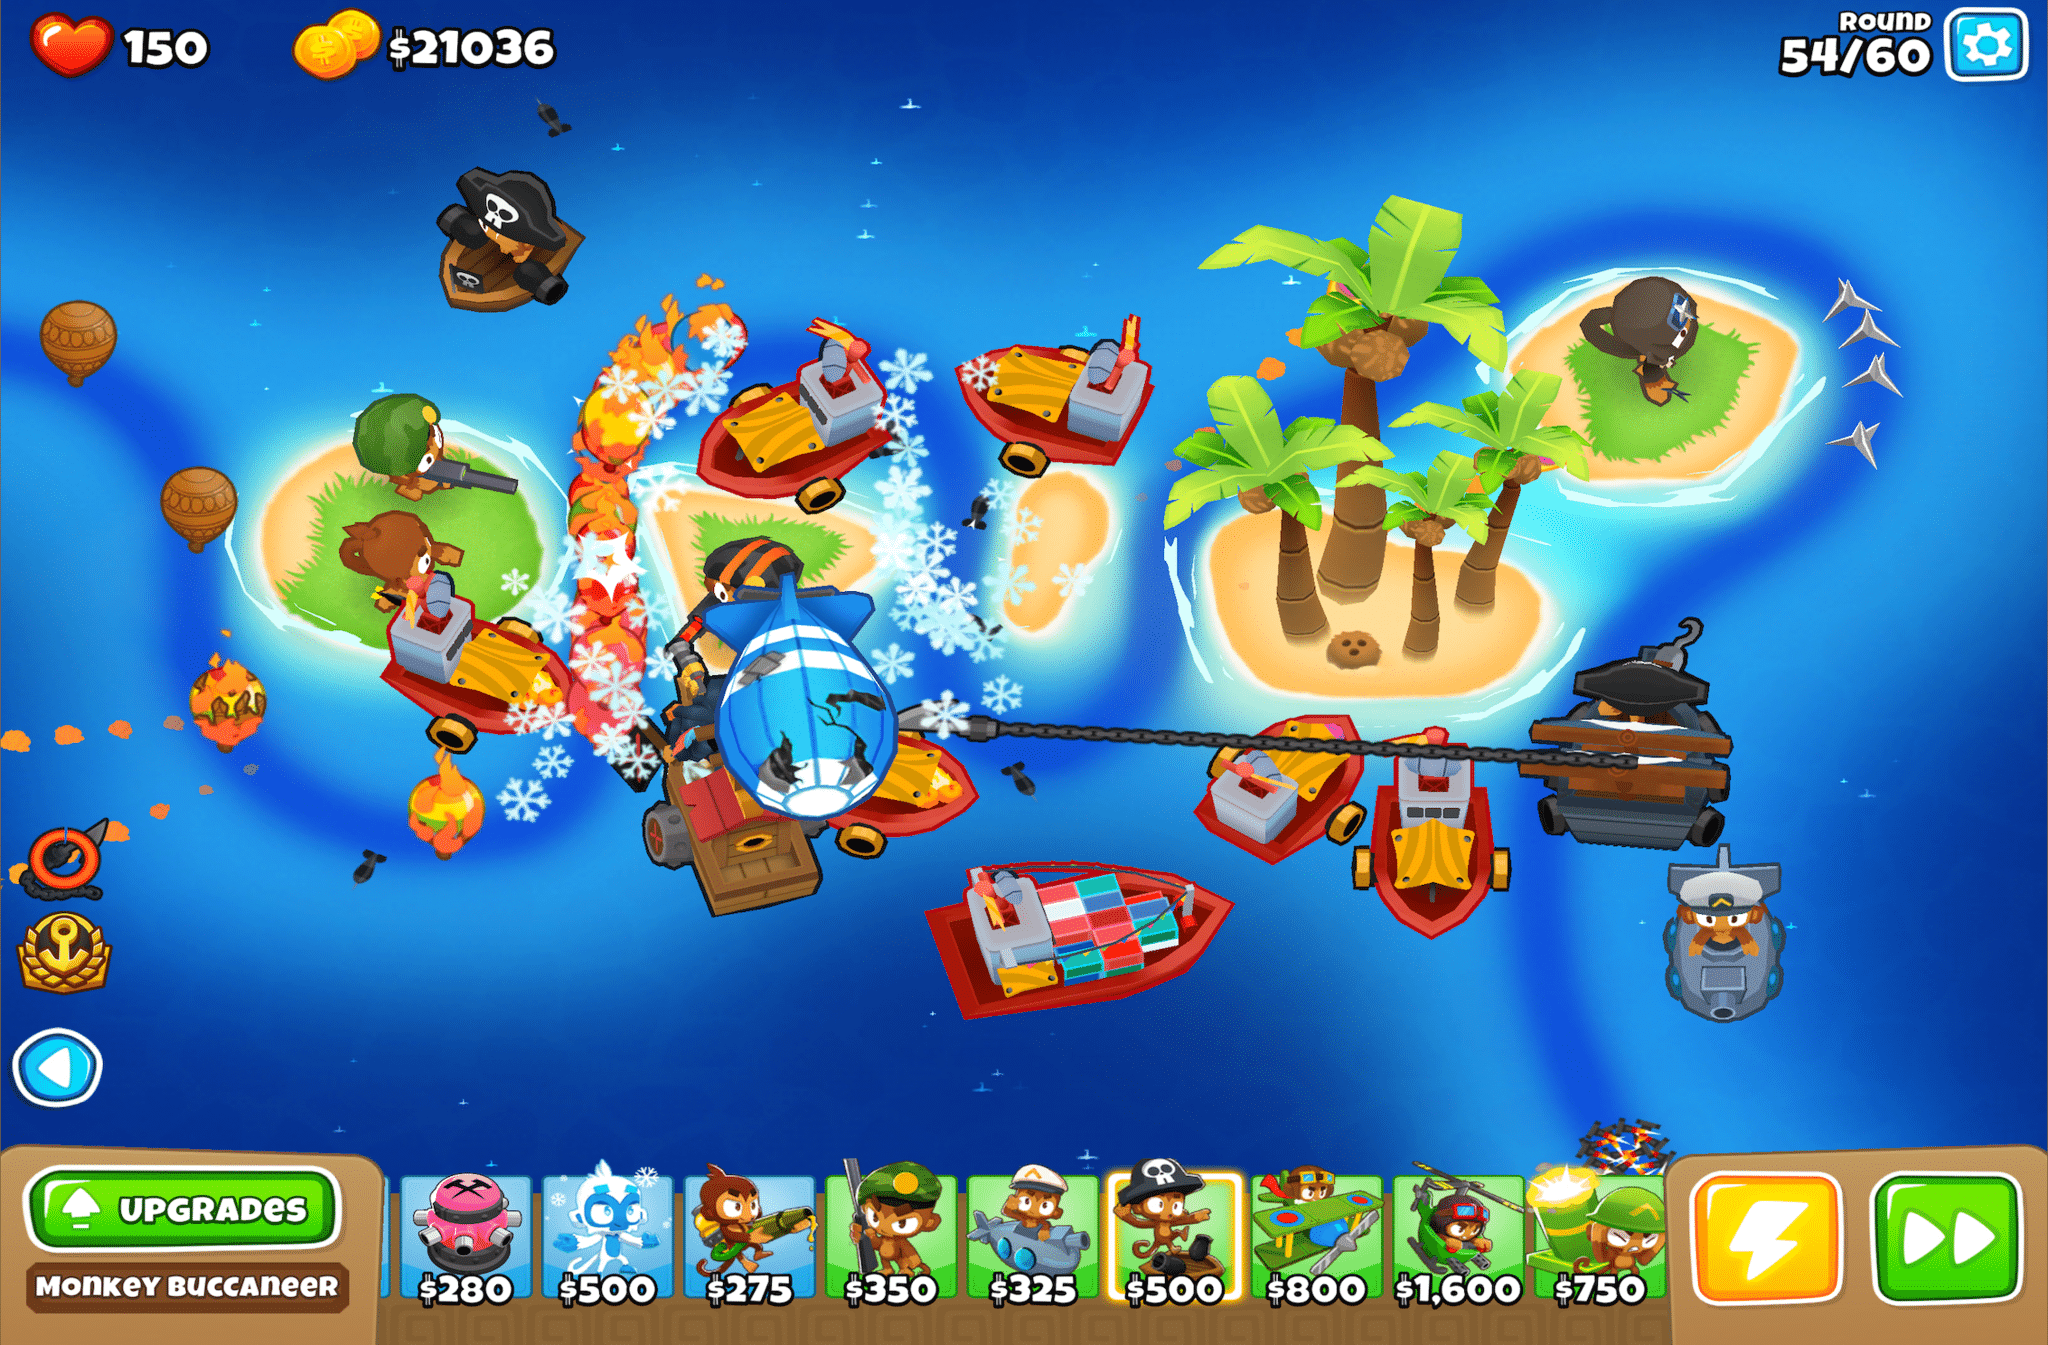 Bloons TD 6+